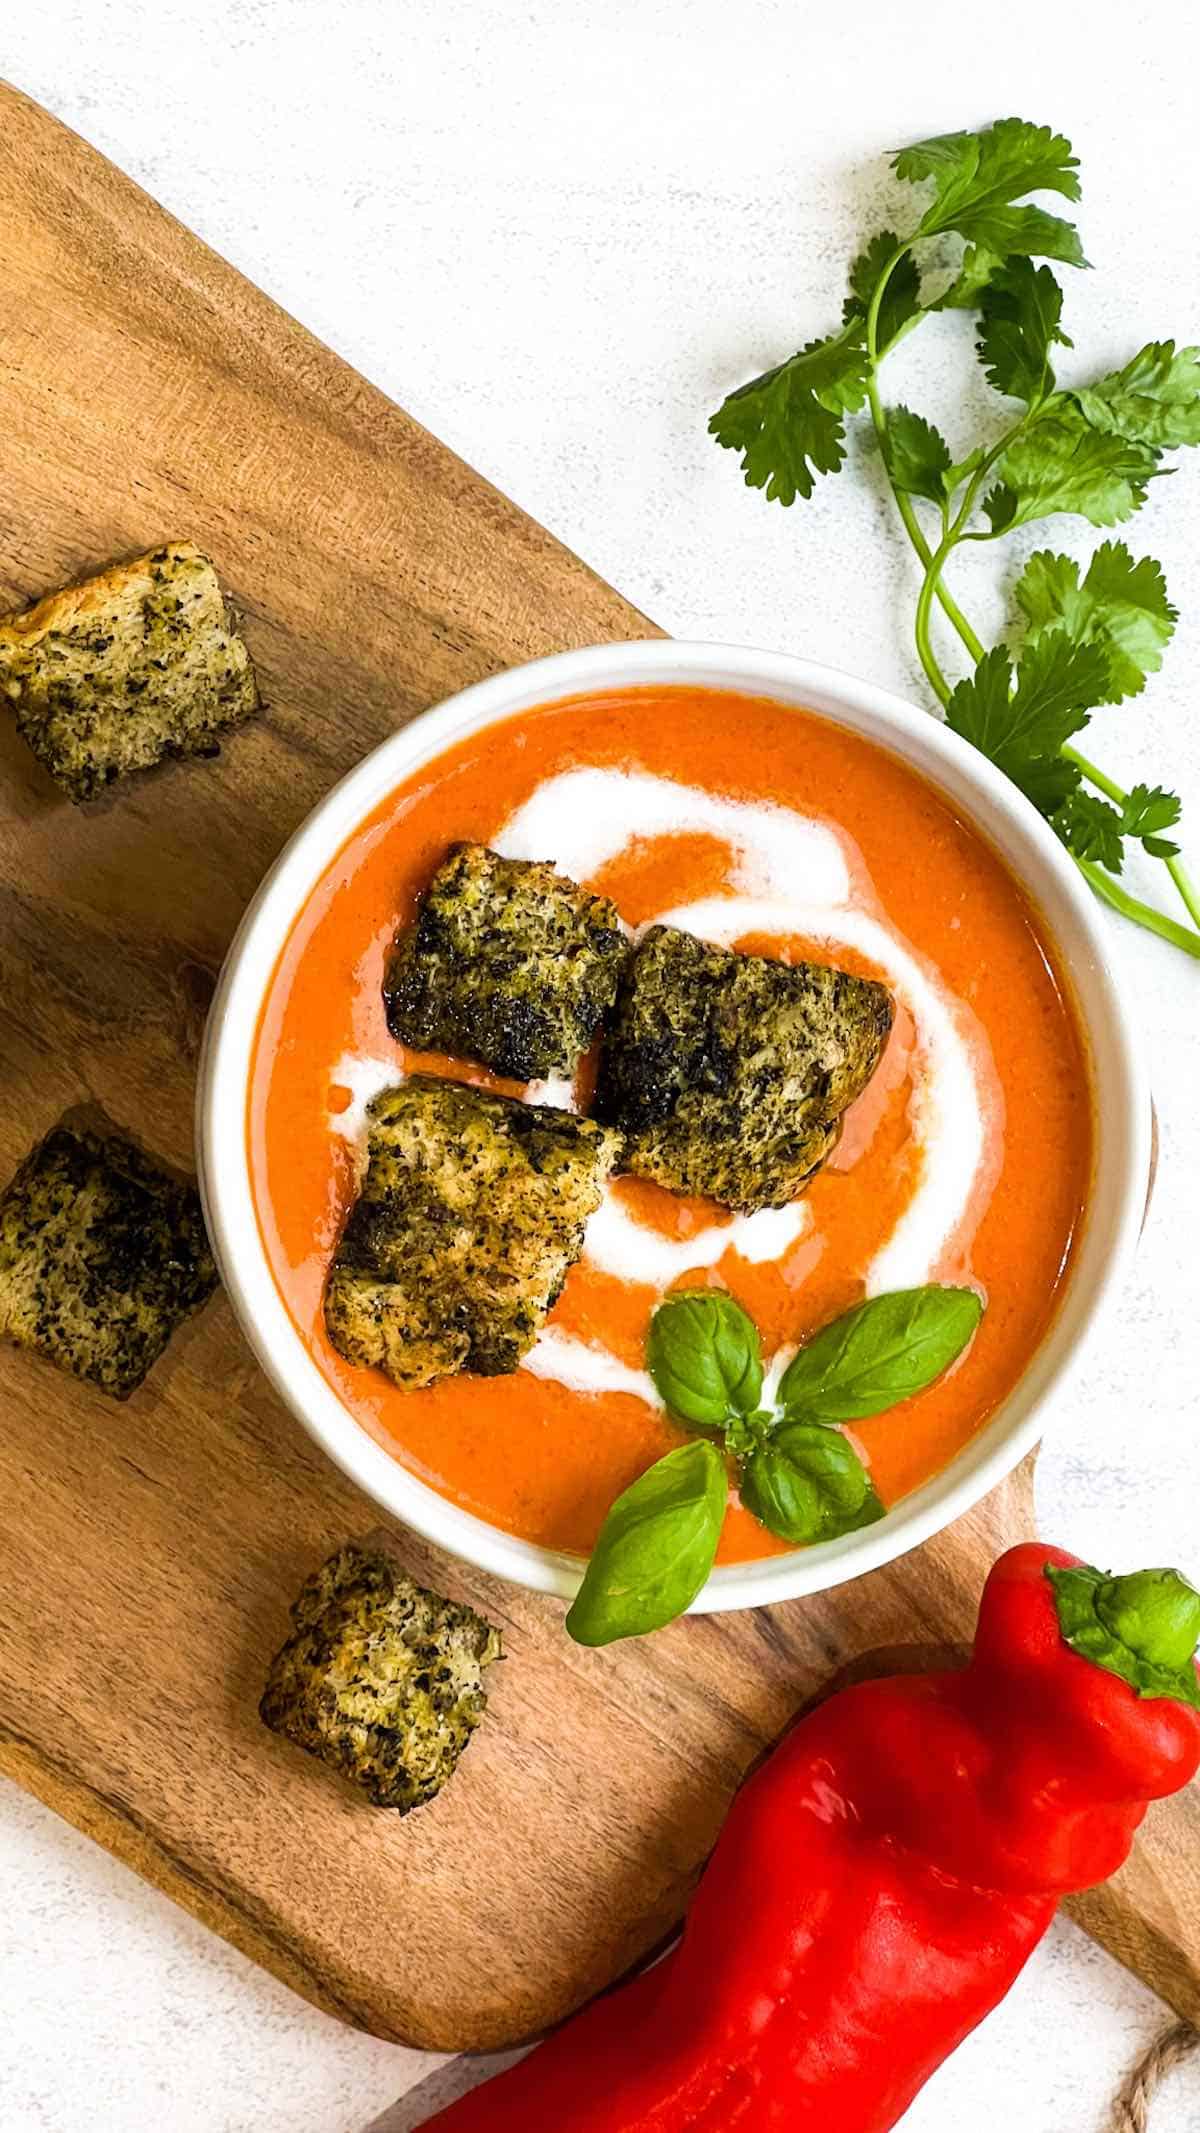 Rich and comforting roasted red pepper soup with nori croutons